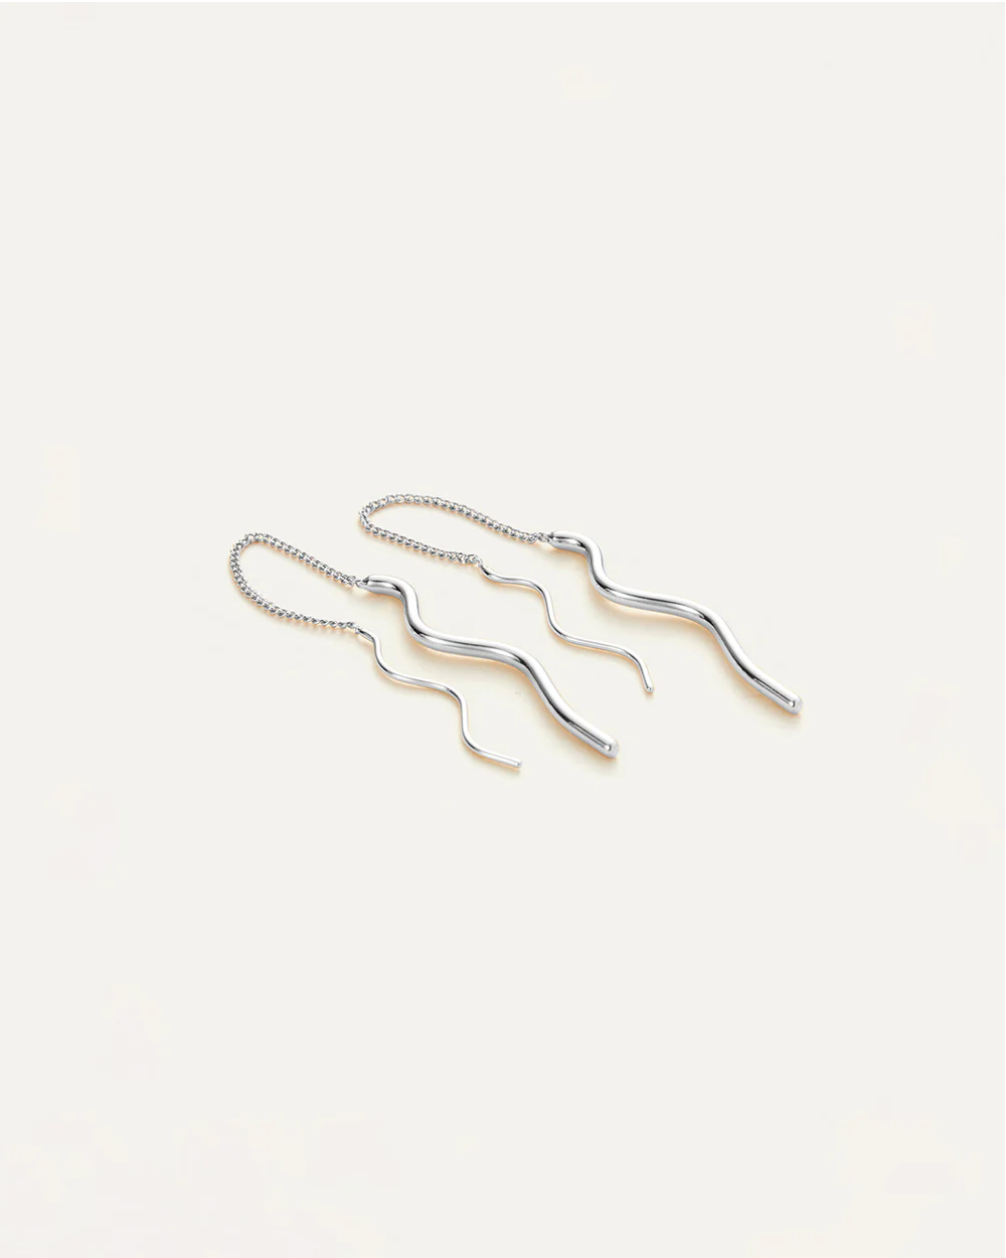 Squiggle threaders - silver